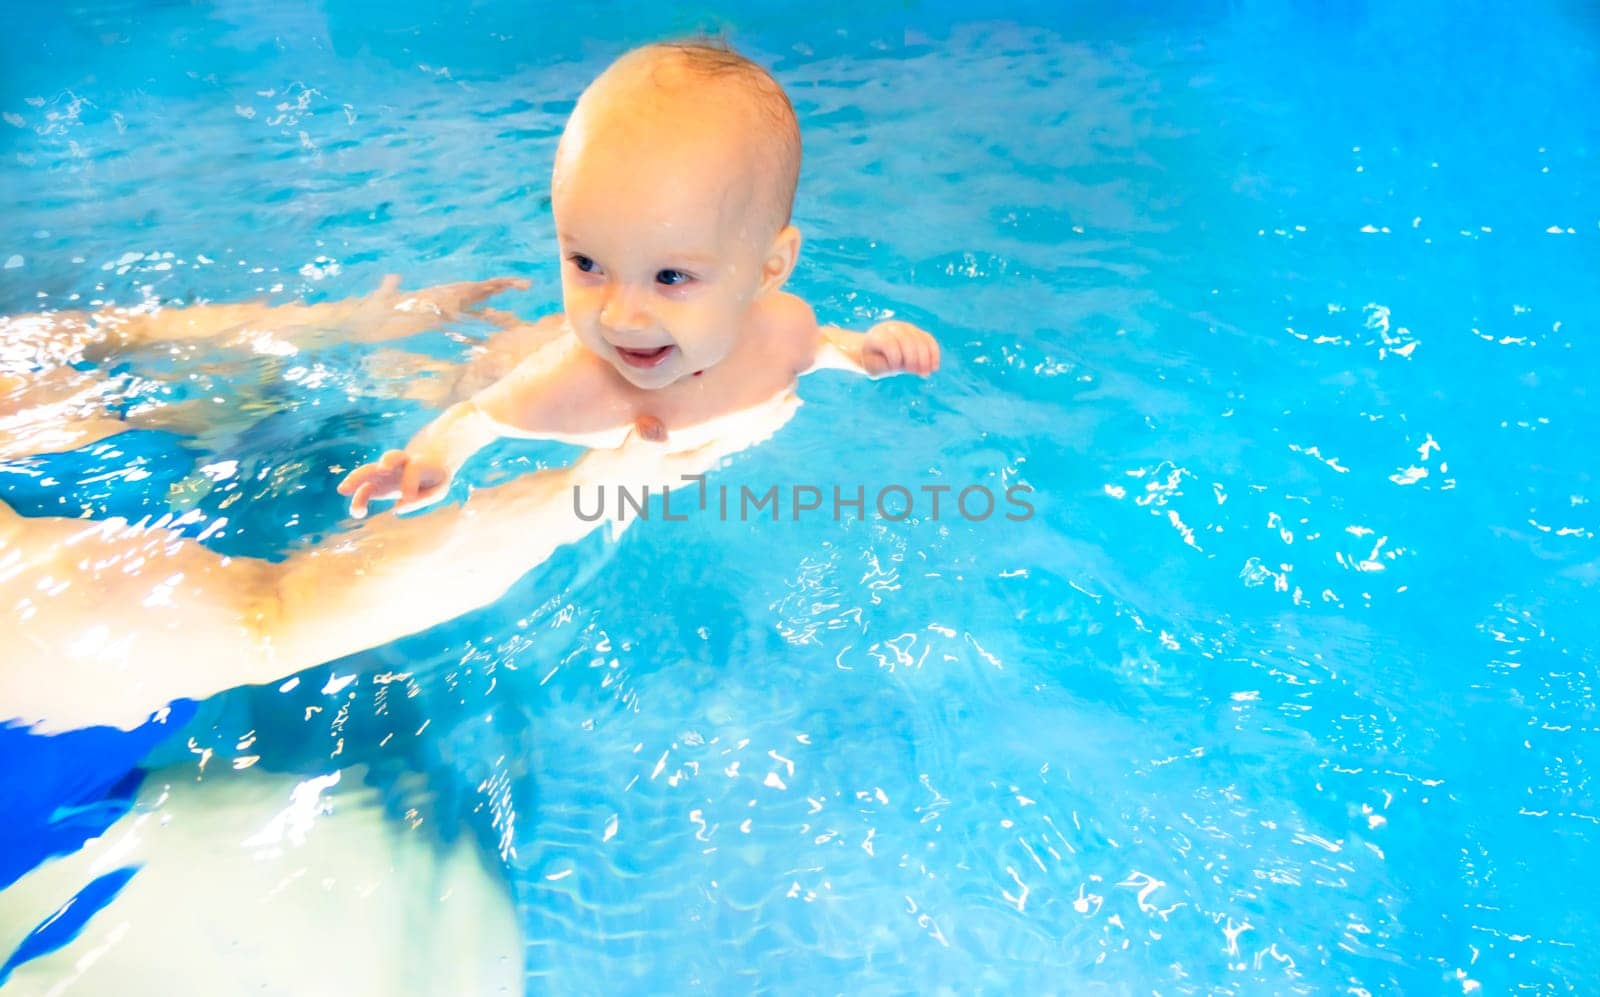 Adorable baby girl enjoying swimming in a pool with her mother early development class for infants teaching children to swim and dive. by kajasja